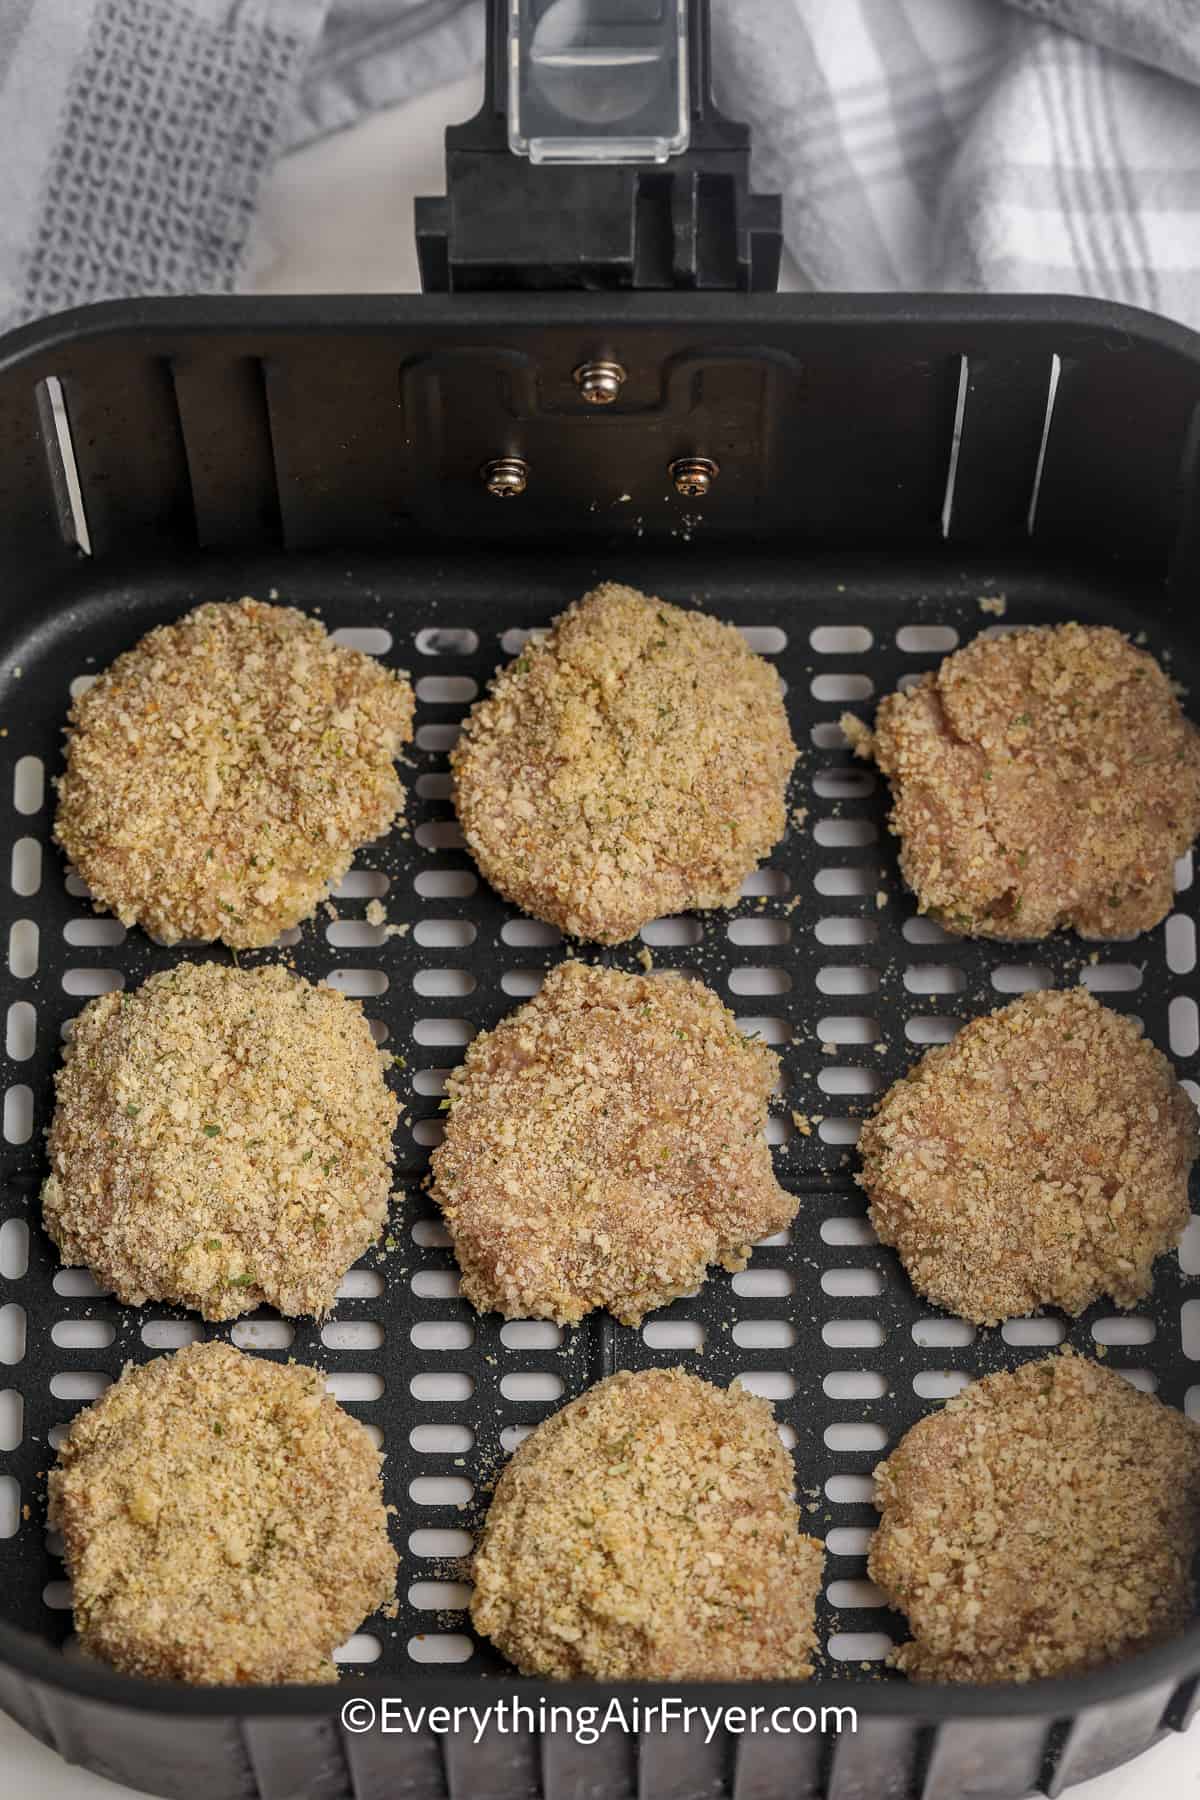 uncooked homemade chicken nuggets in an air fryer tray